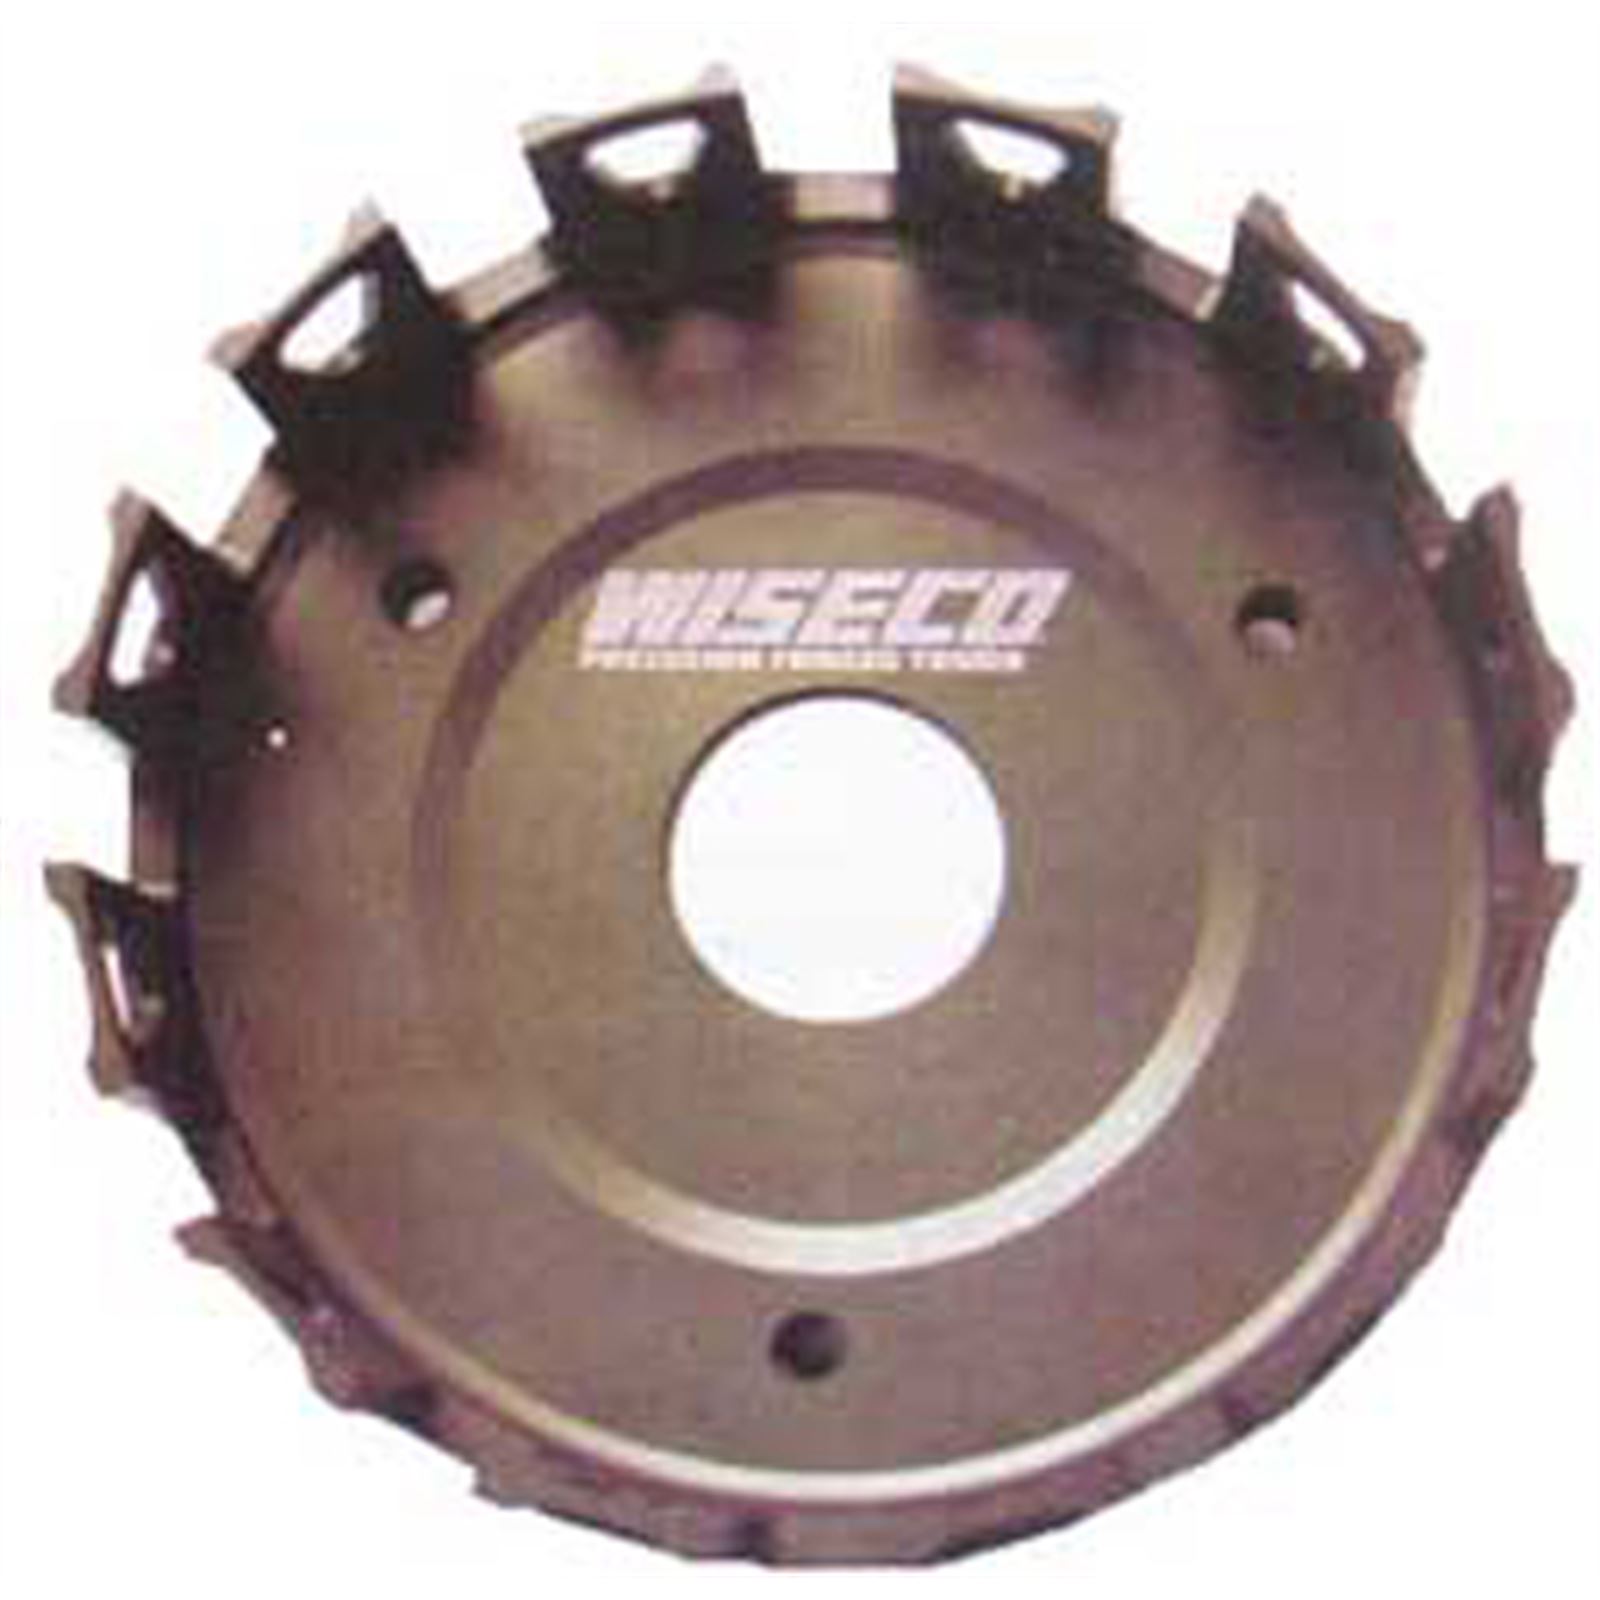 Wiseco Precision Forged Clutch Basket